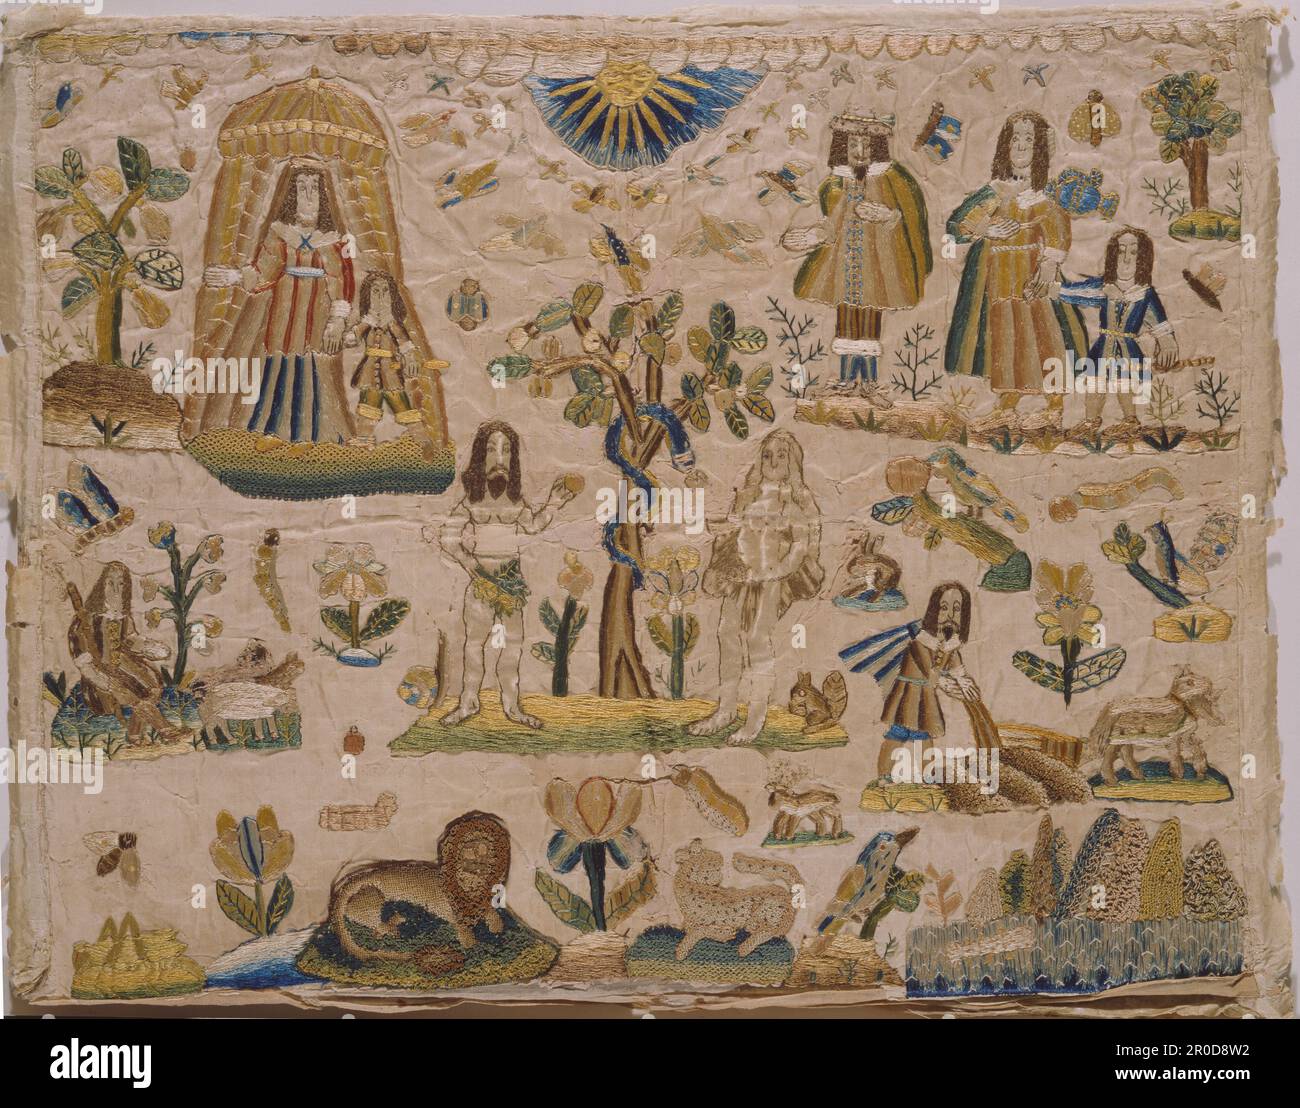 Embroidered Panel, 1630.  Embroidered panel, with silk threads. Depicting Sarah and Isaac at the tent door, Adam and Eve standing under an apple tree with serpent, a man woman and child, a man ploughing a field, a seated shepherd with sheep, moths, butterflies, birds, a lion and leopard, squirrel and rabbit, sun surrounded by birds. Stock Photo